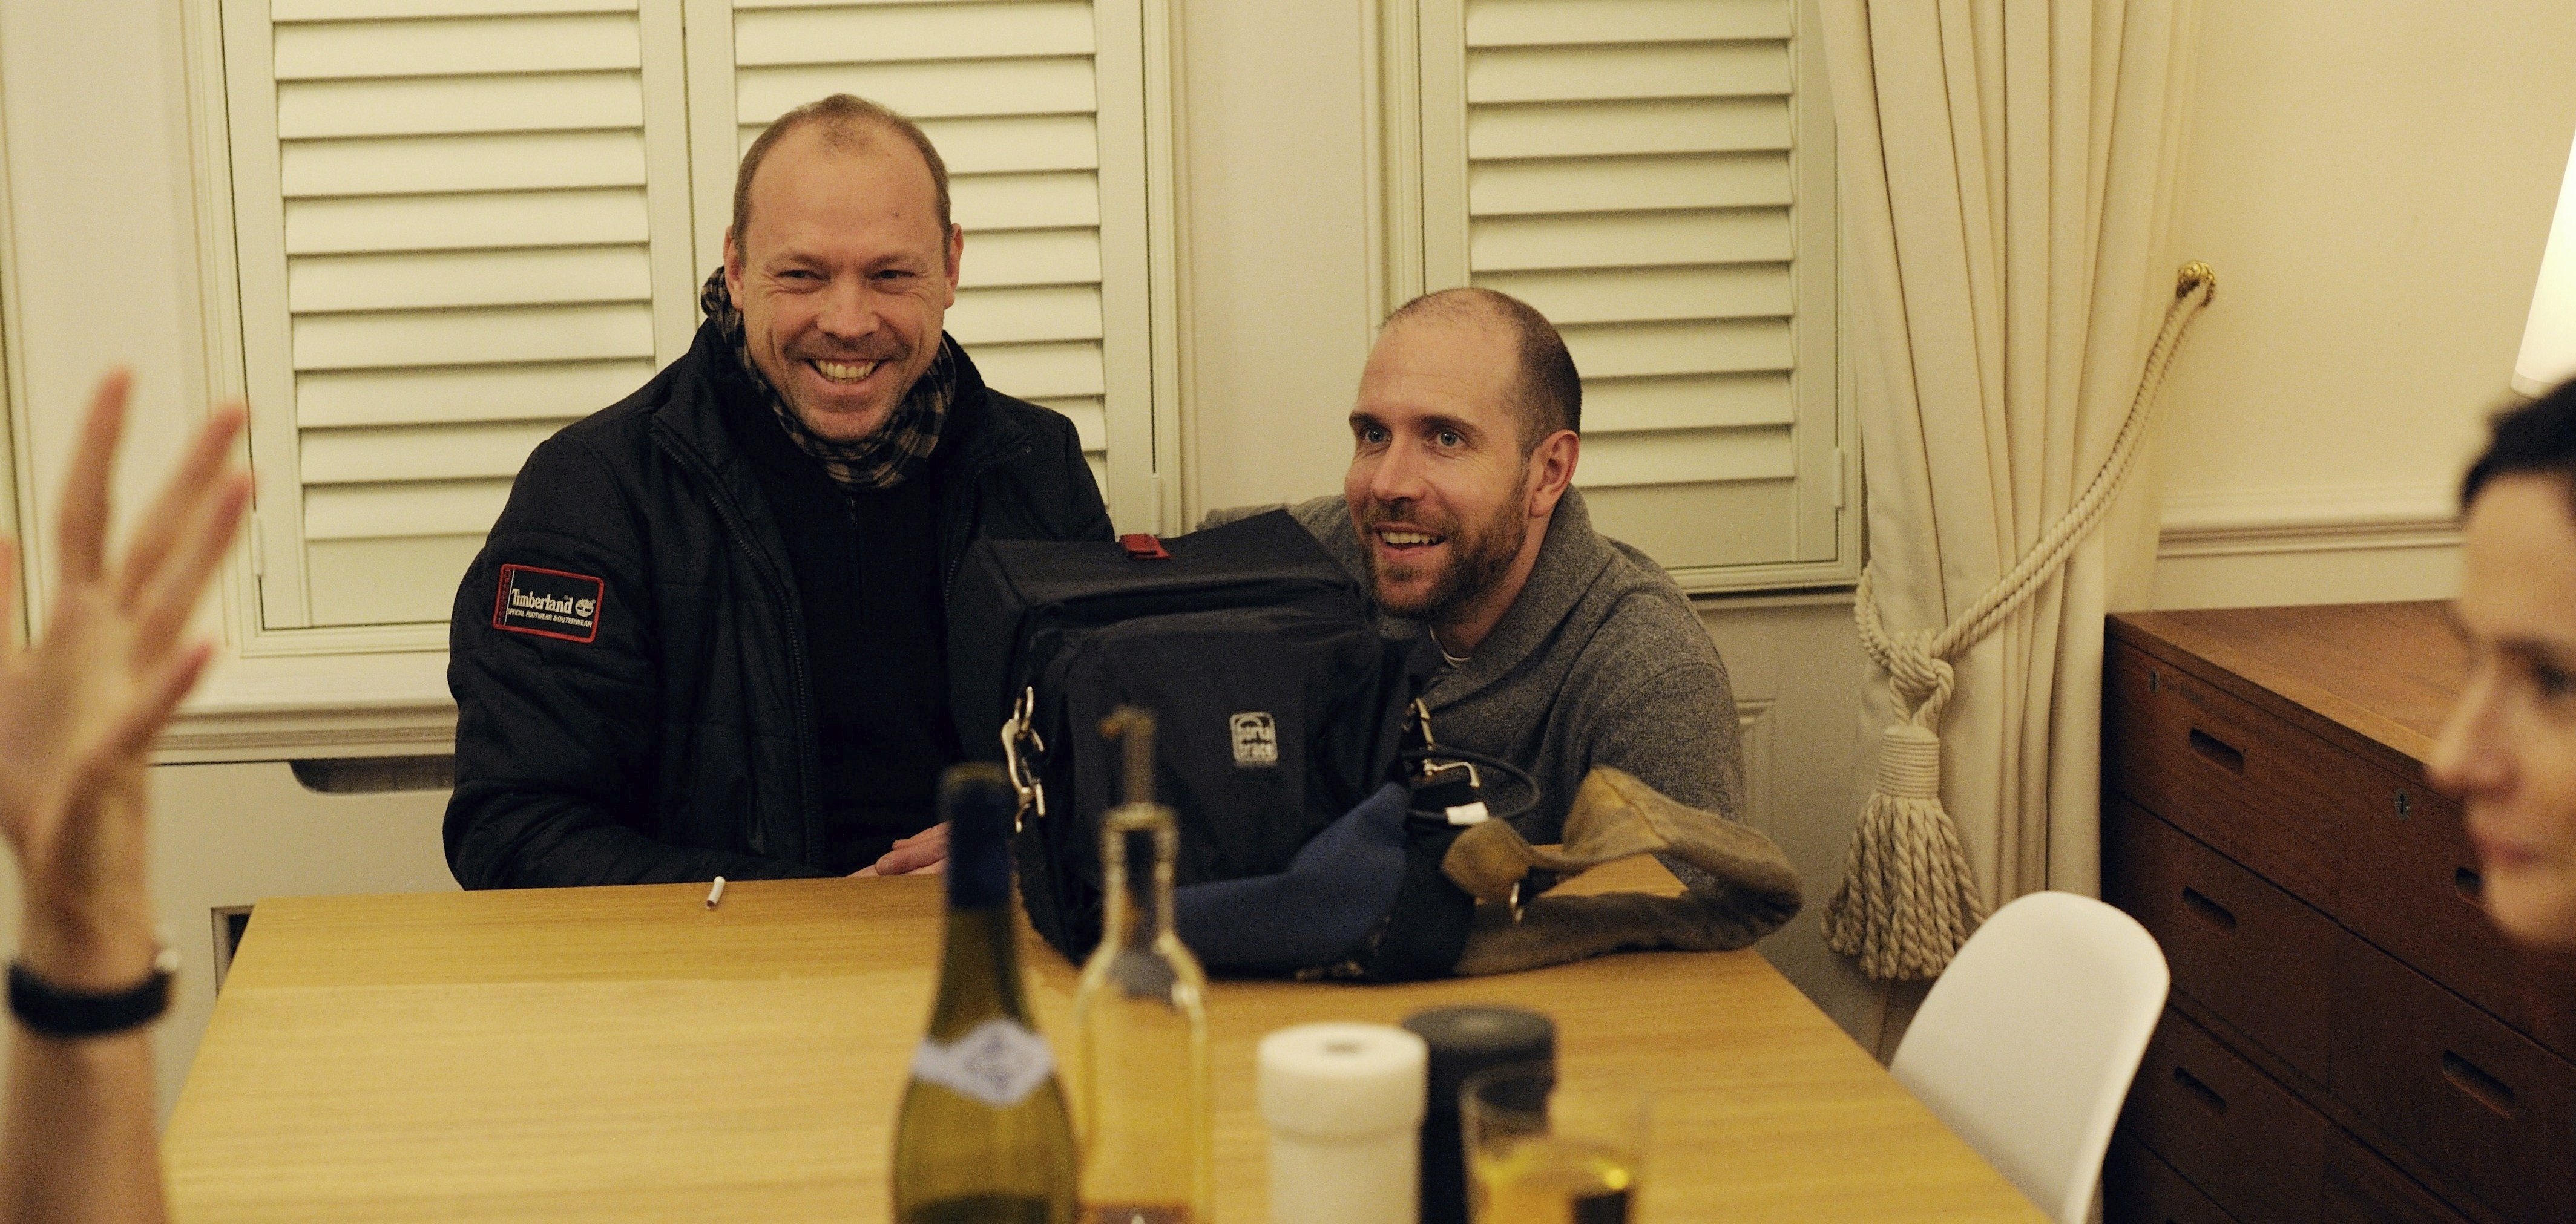 Behind the scenes - Love/Me/Do Writer/Director Martin Stitt with Producer Ian Prior